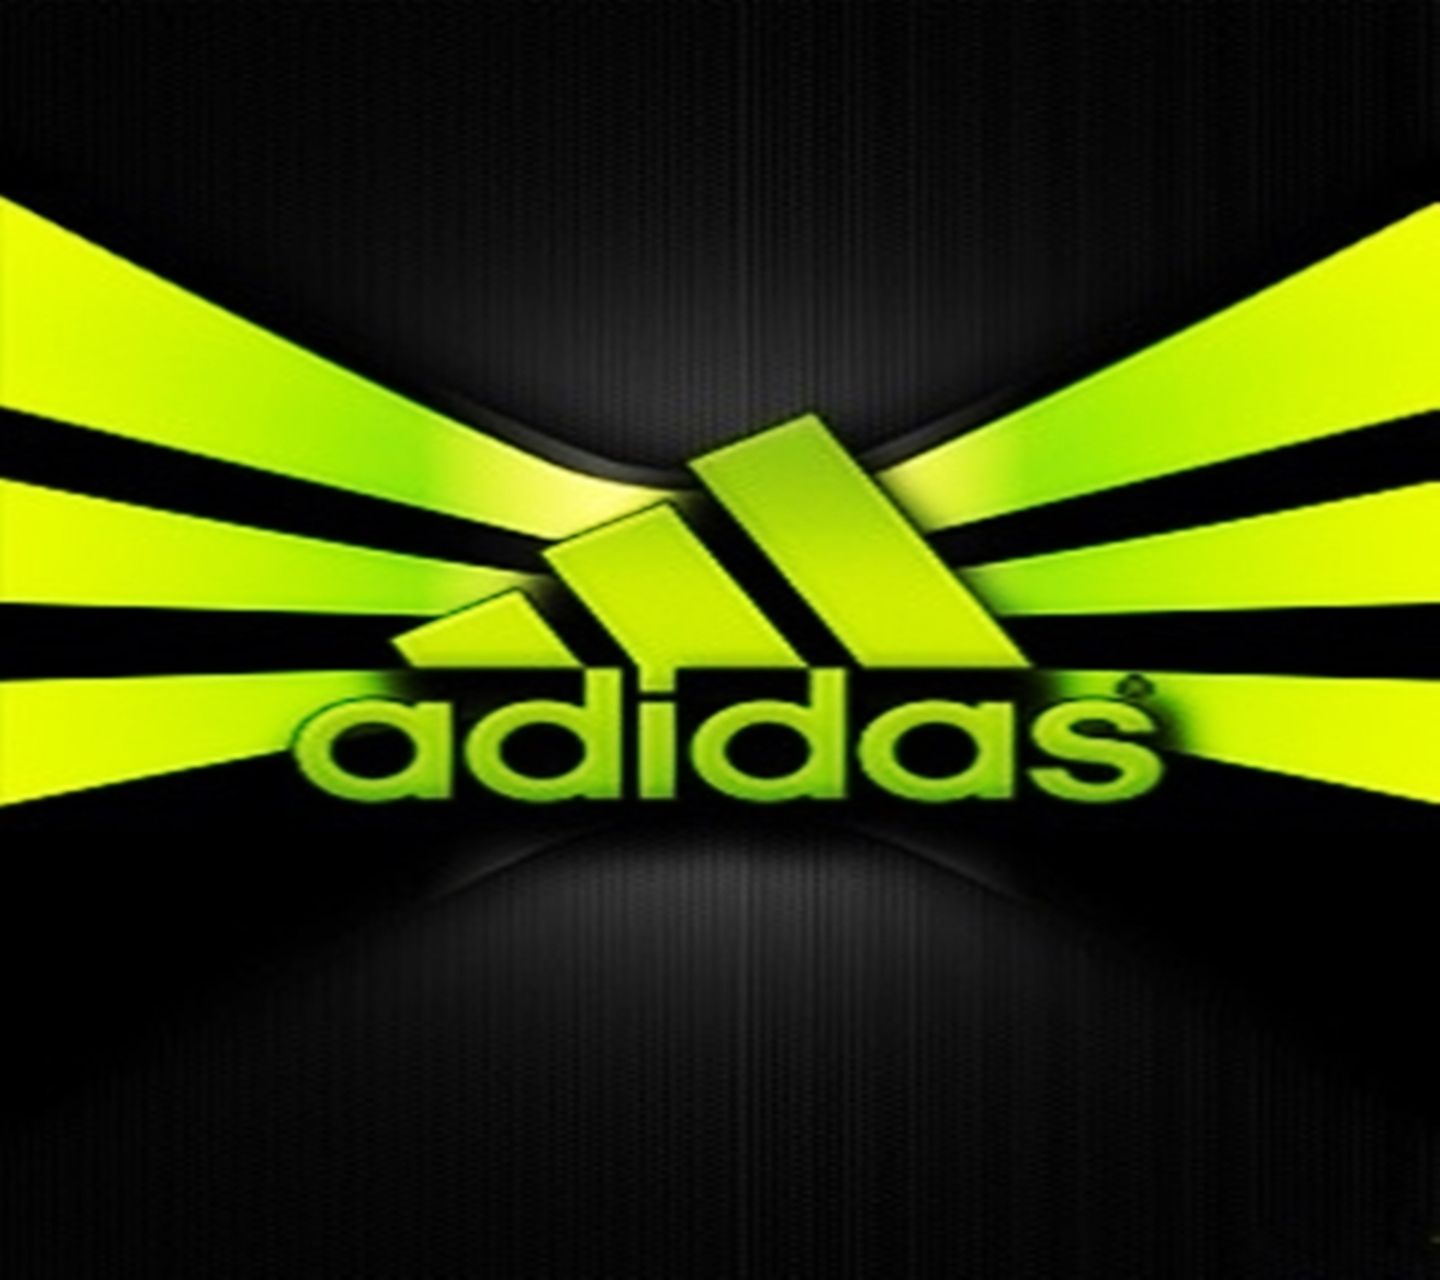 Cool Adidas Logo Wallpapers Wallpapers